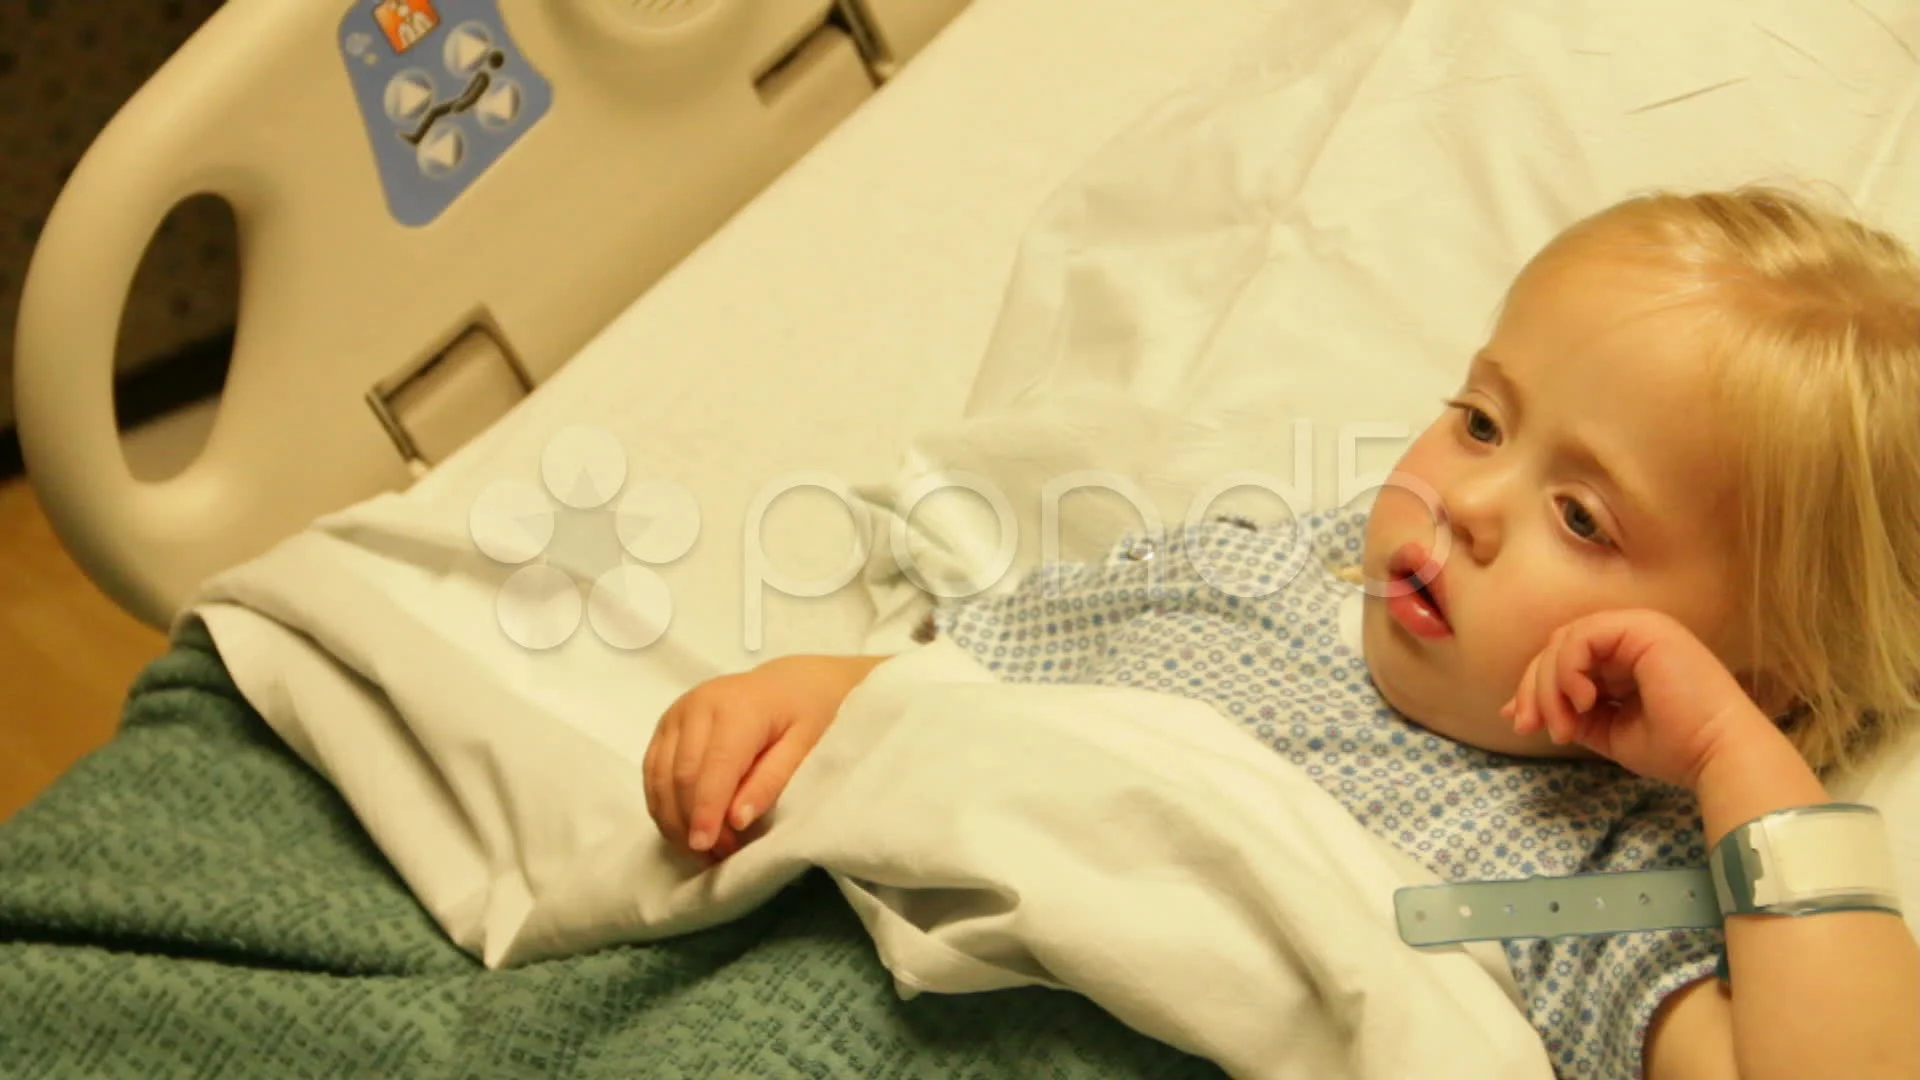 Young child in hospital bed HD8469 | Stock Video | Pond5